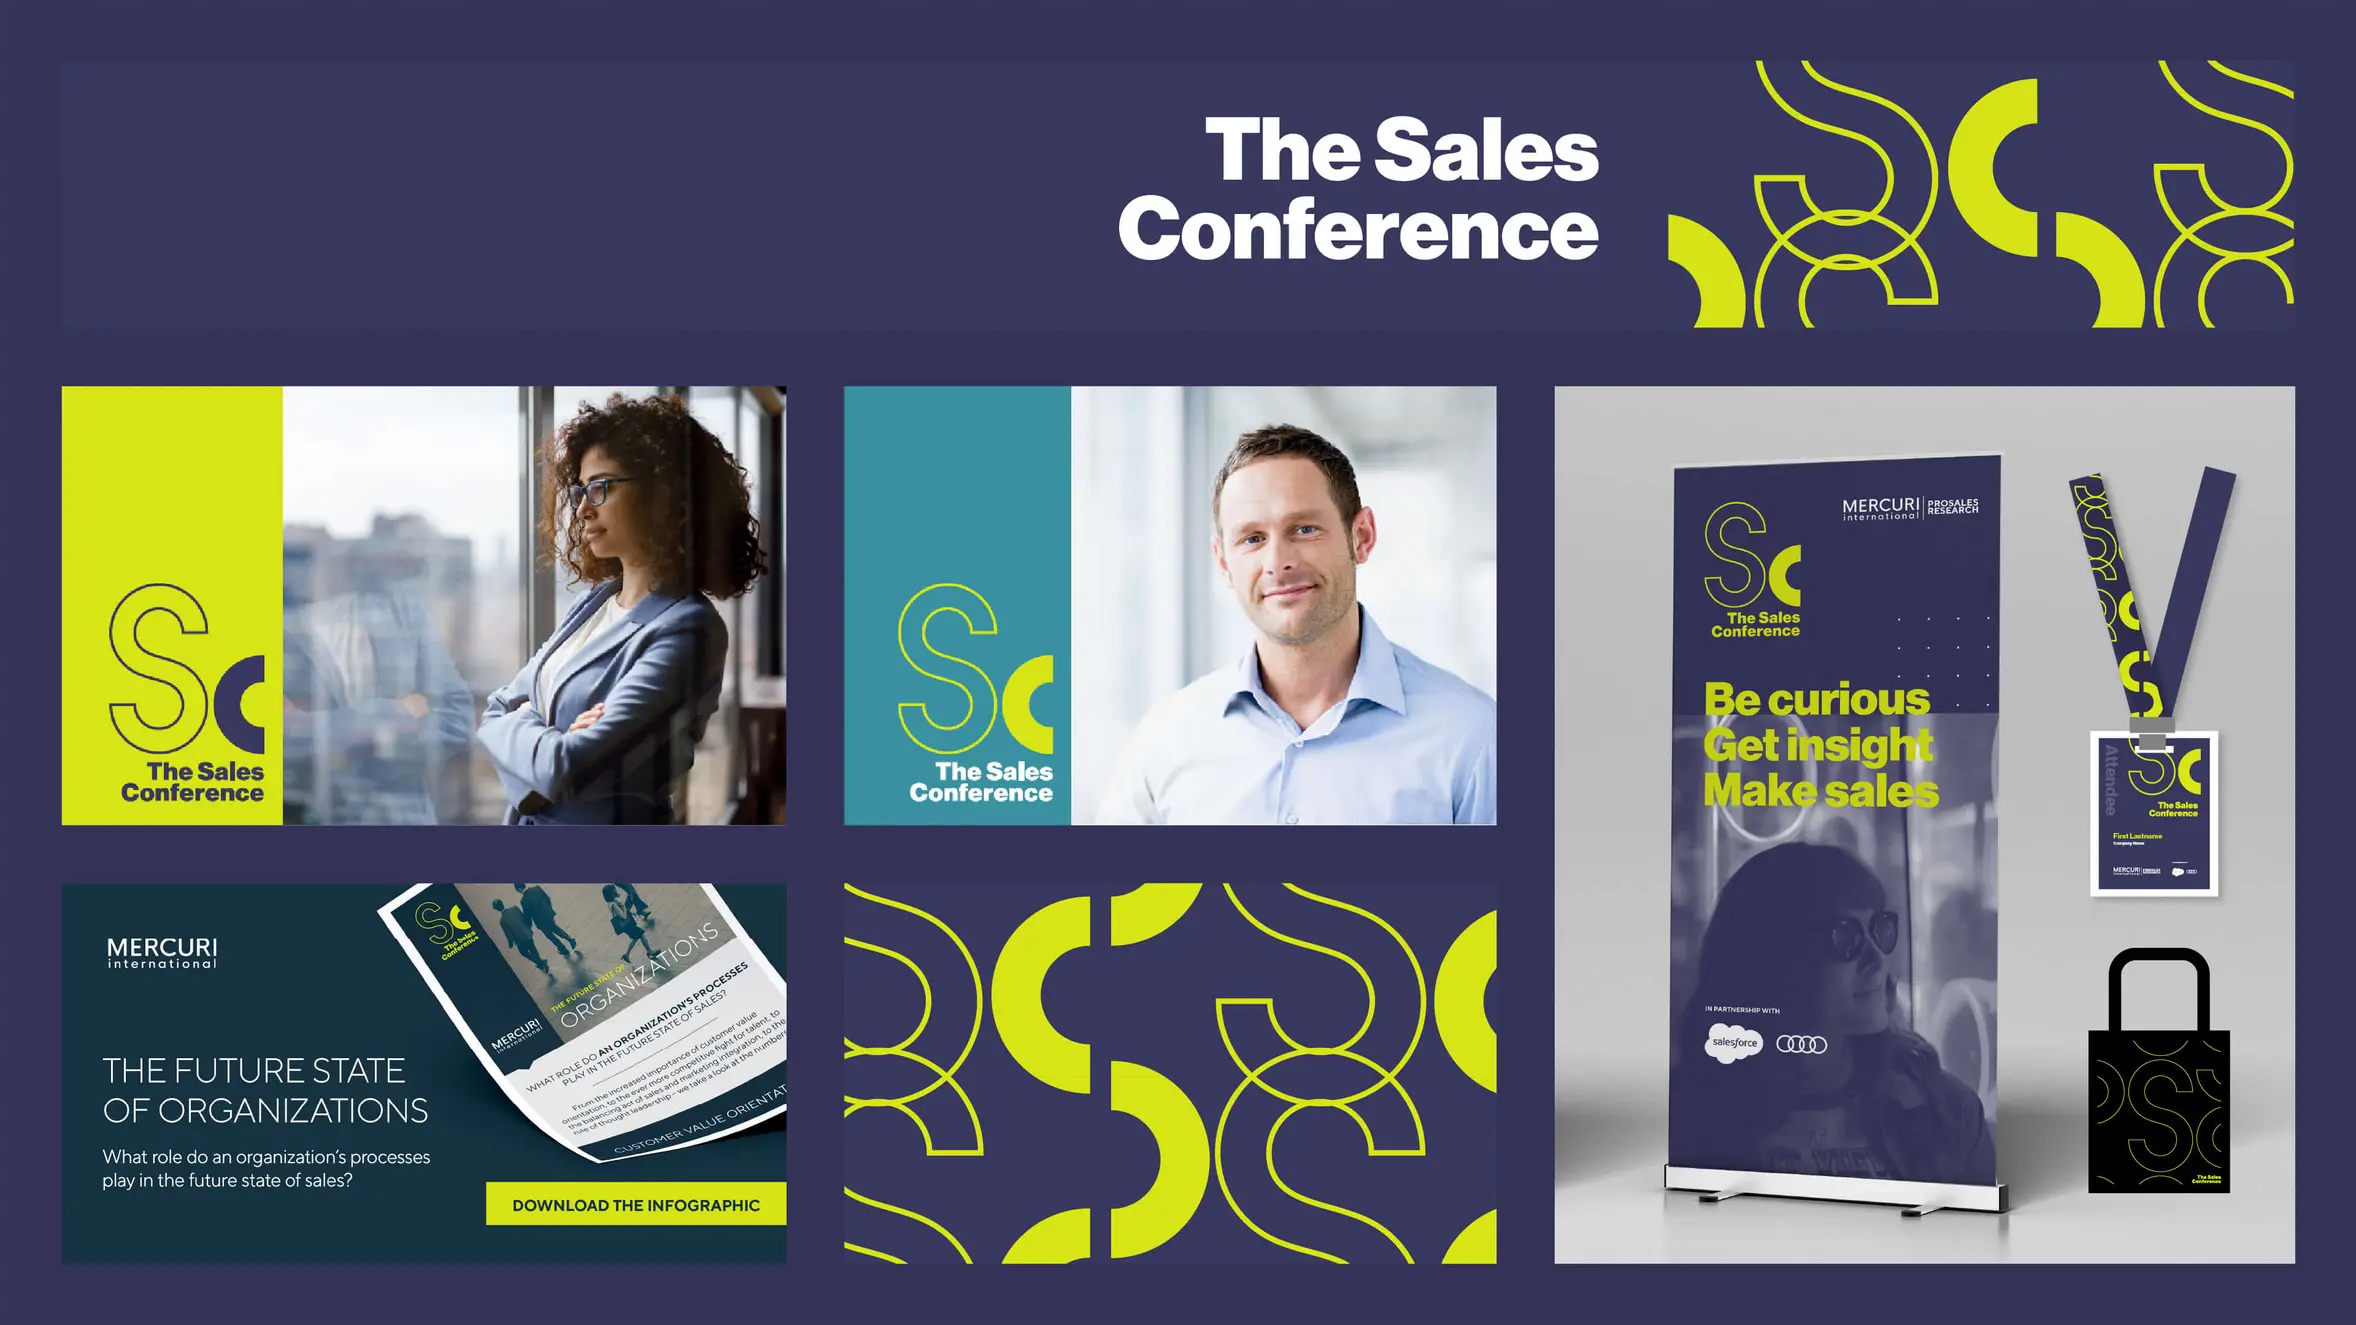 Sales Conference branding and campaign